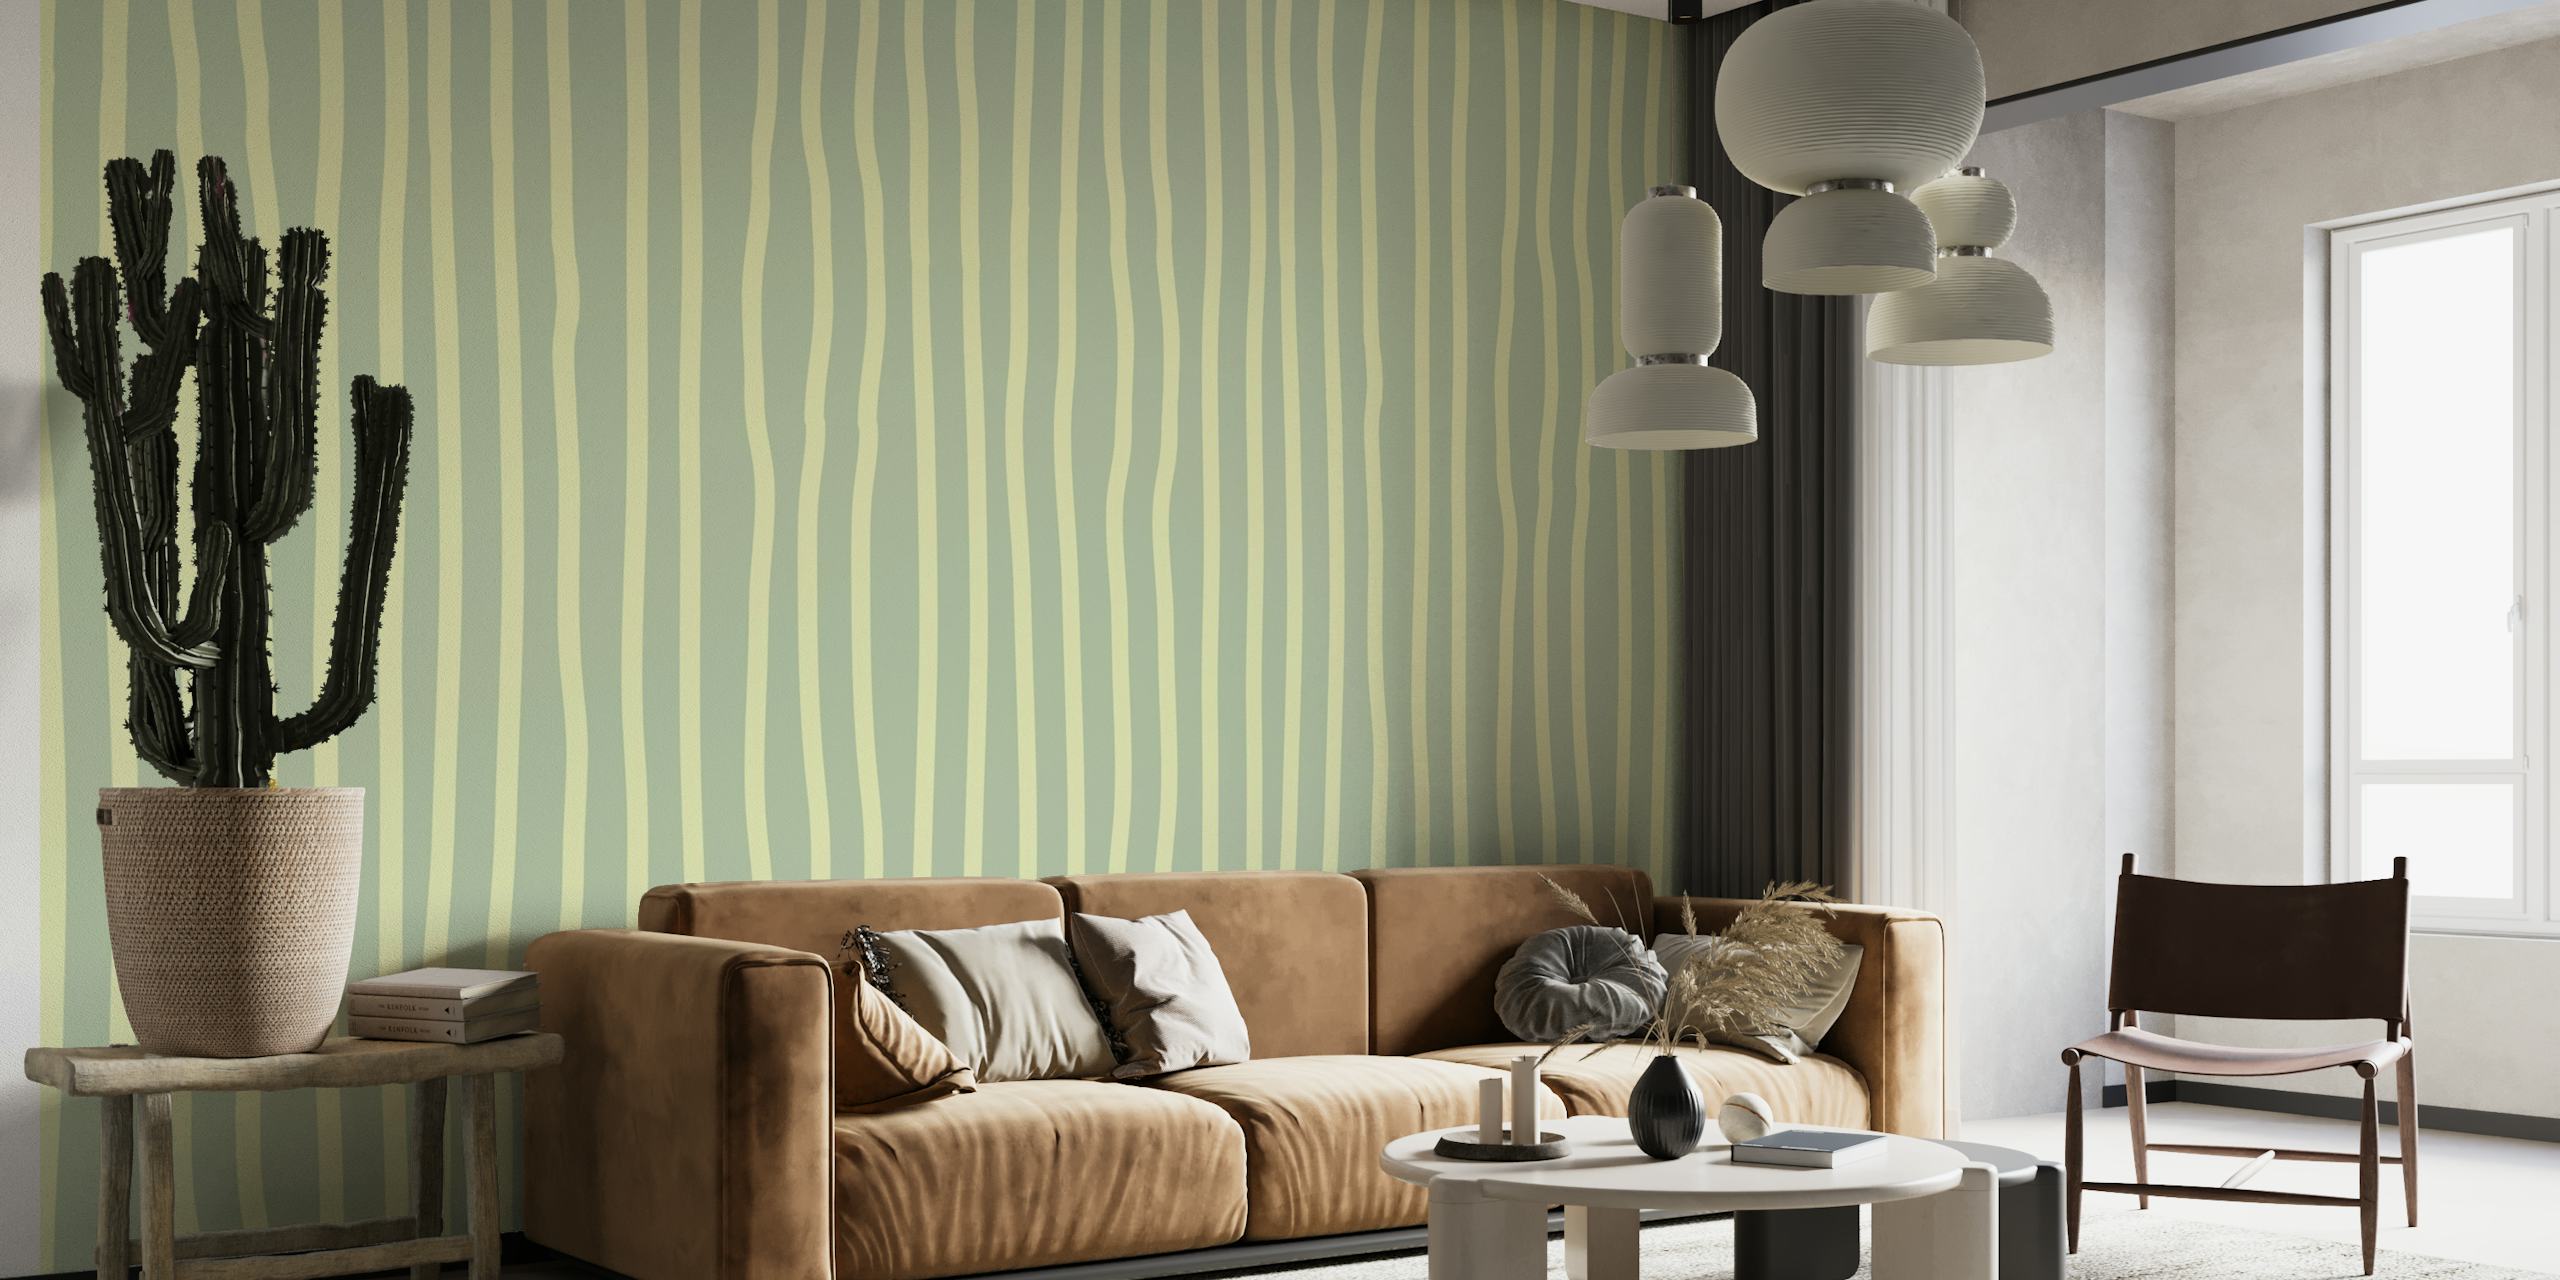 Minimalistic Pin Stripes Sage Green And Beige papel de parede